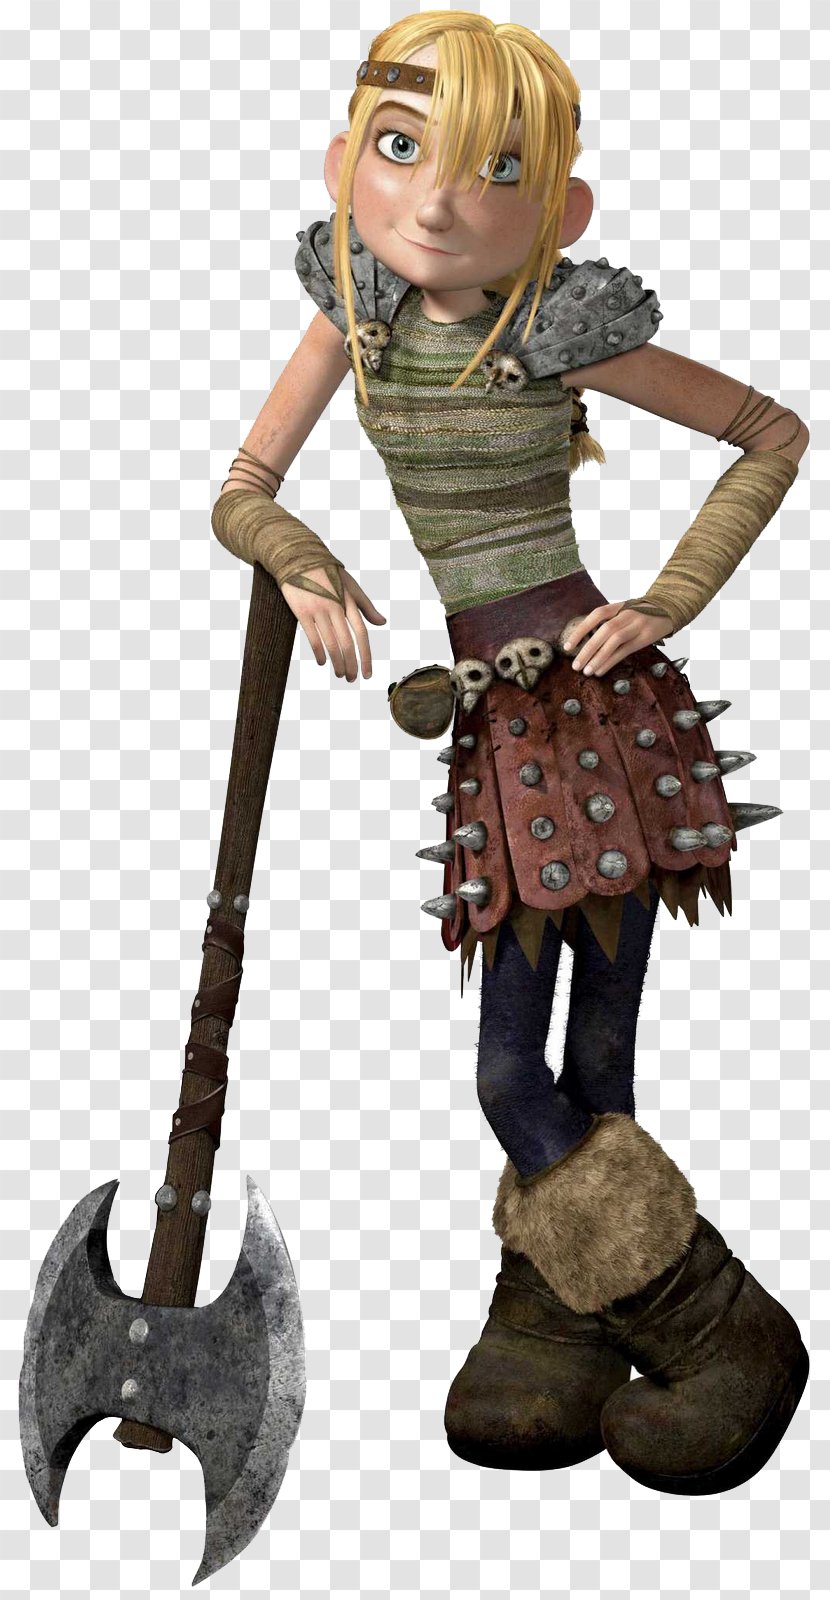 How To Train Your Dragon Astrid Ruffnut Hiccup Horrendous Haddock III Tuffnut - Character Transparent PNG